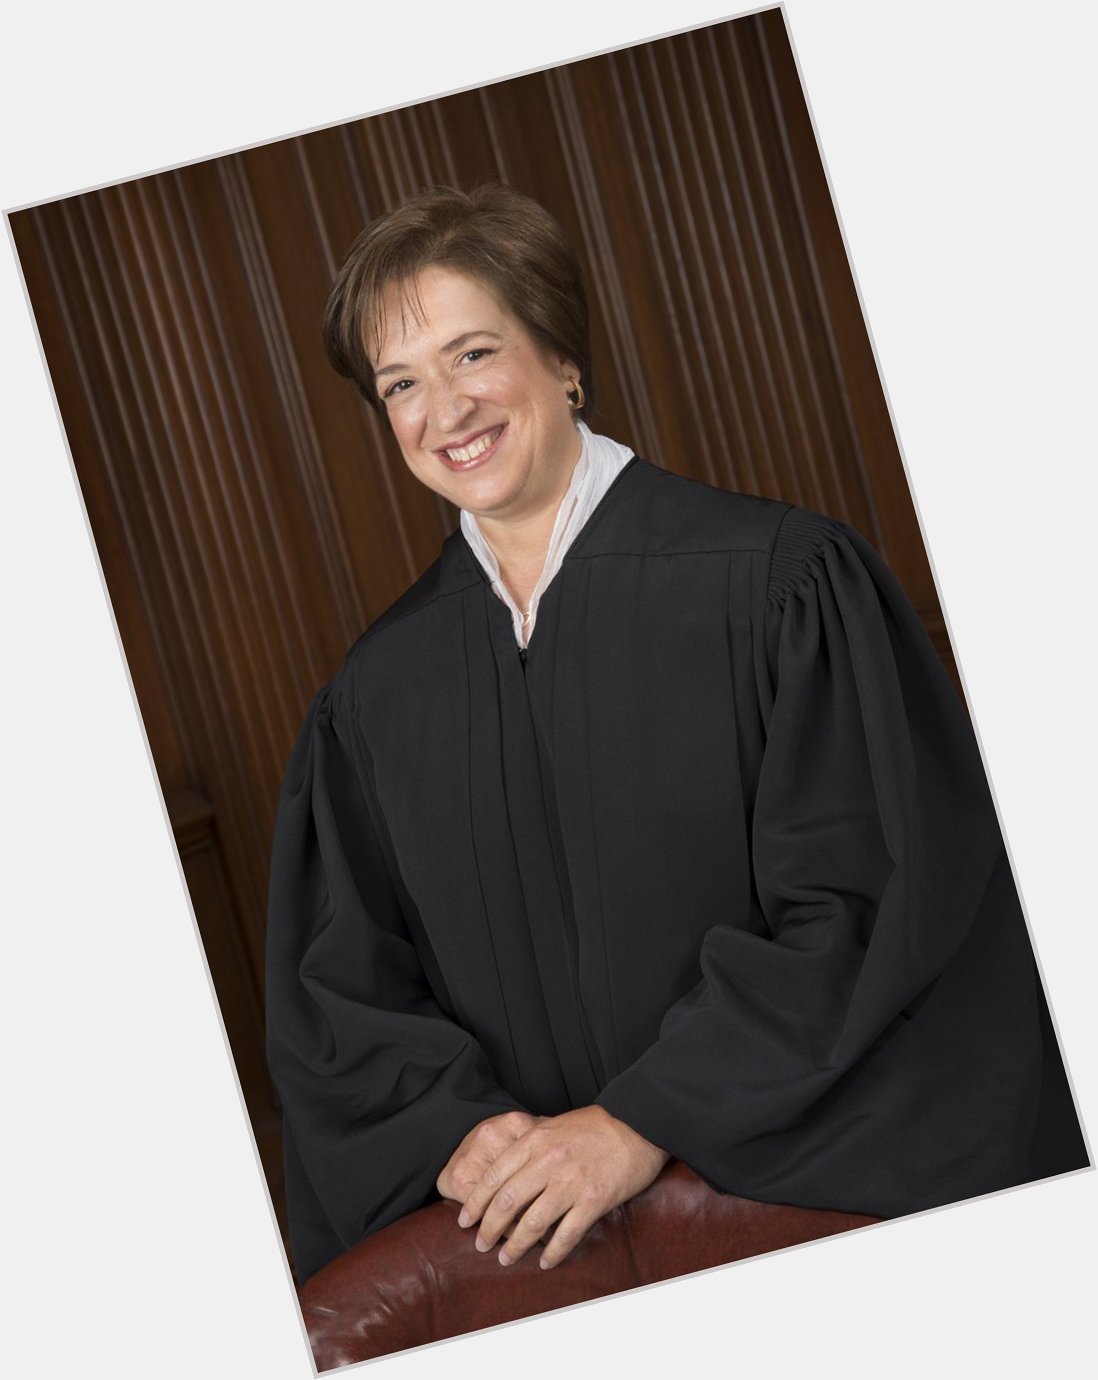 April 28: Happy 59th birthday to Associate Justice of the Supreme Court of the United States,Elena Kagan(\"2010-\") 